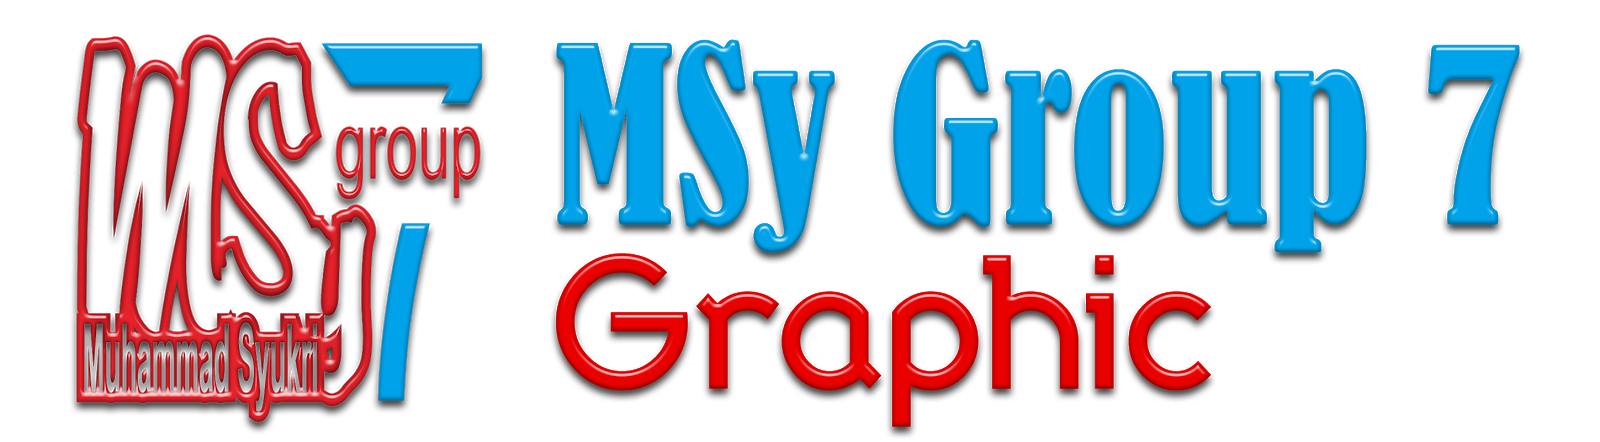 MSy Group 7 Graphic